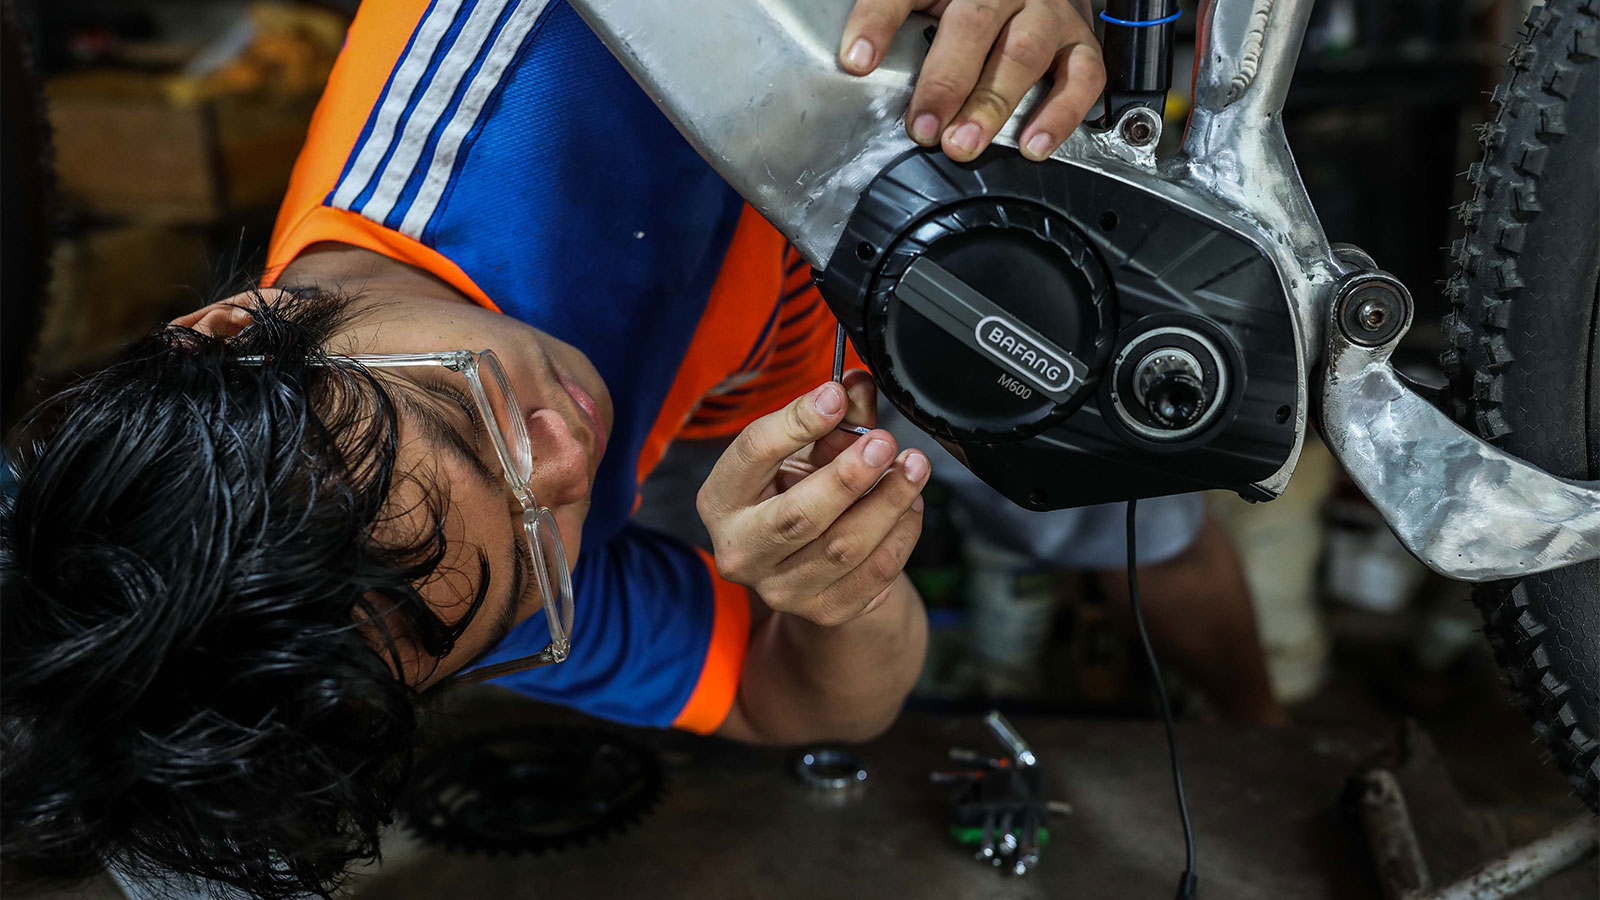 A man wearing glasses leans over to work on the frame of an e-bike with a tool